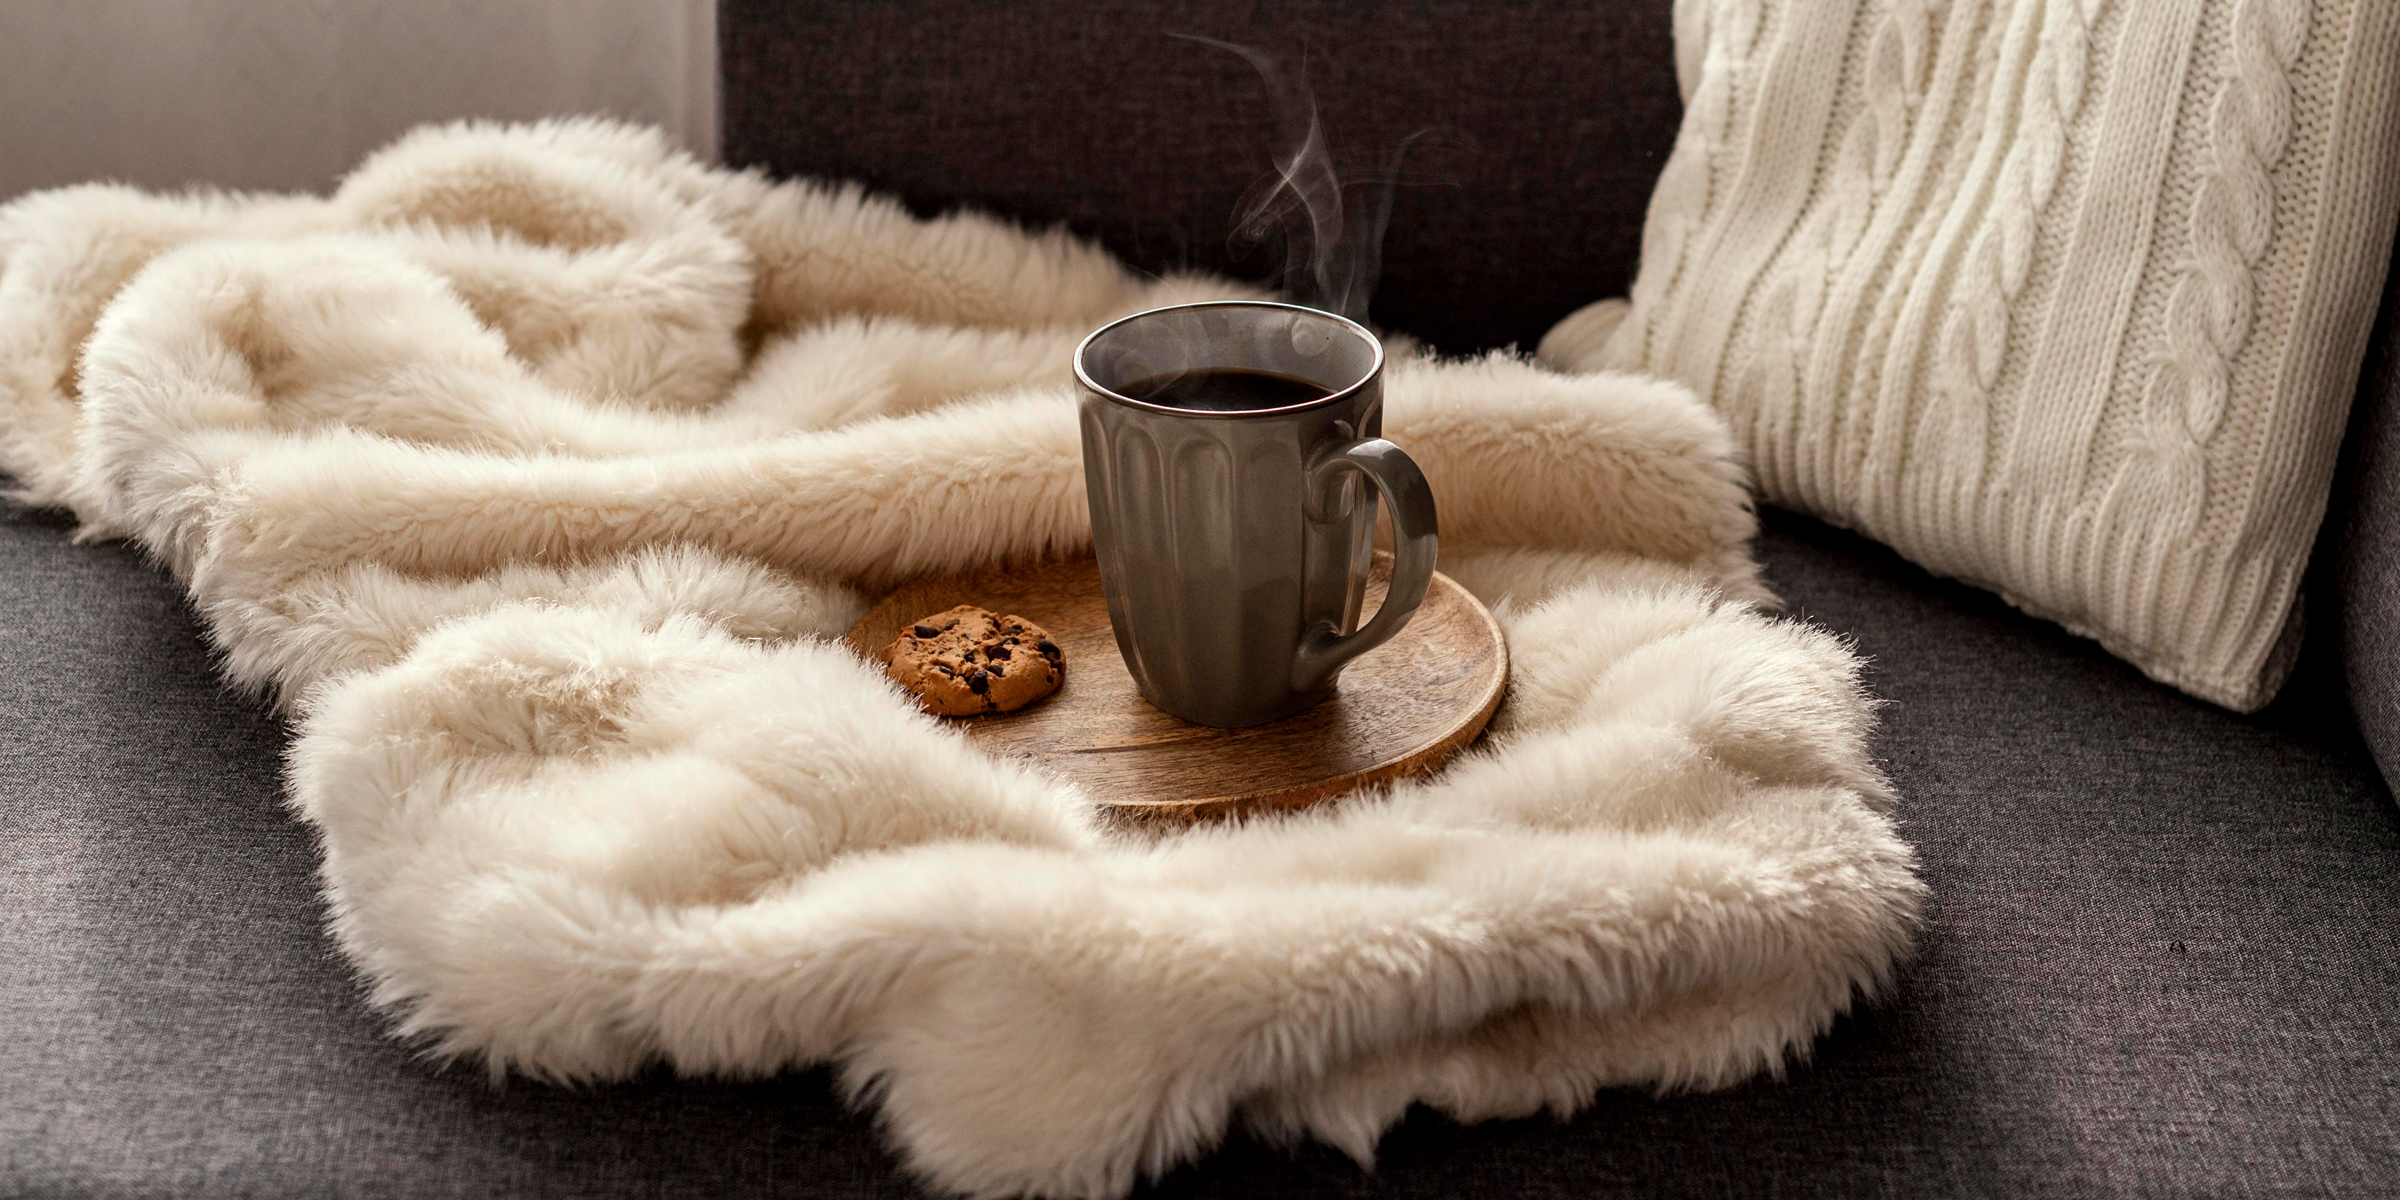 A cup of steaming coffee and a chocolate chip cookie on a wooden saucer, placed on a faux fur throw | Source: Freepik